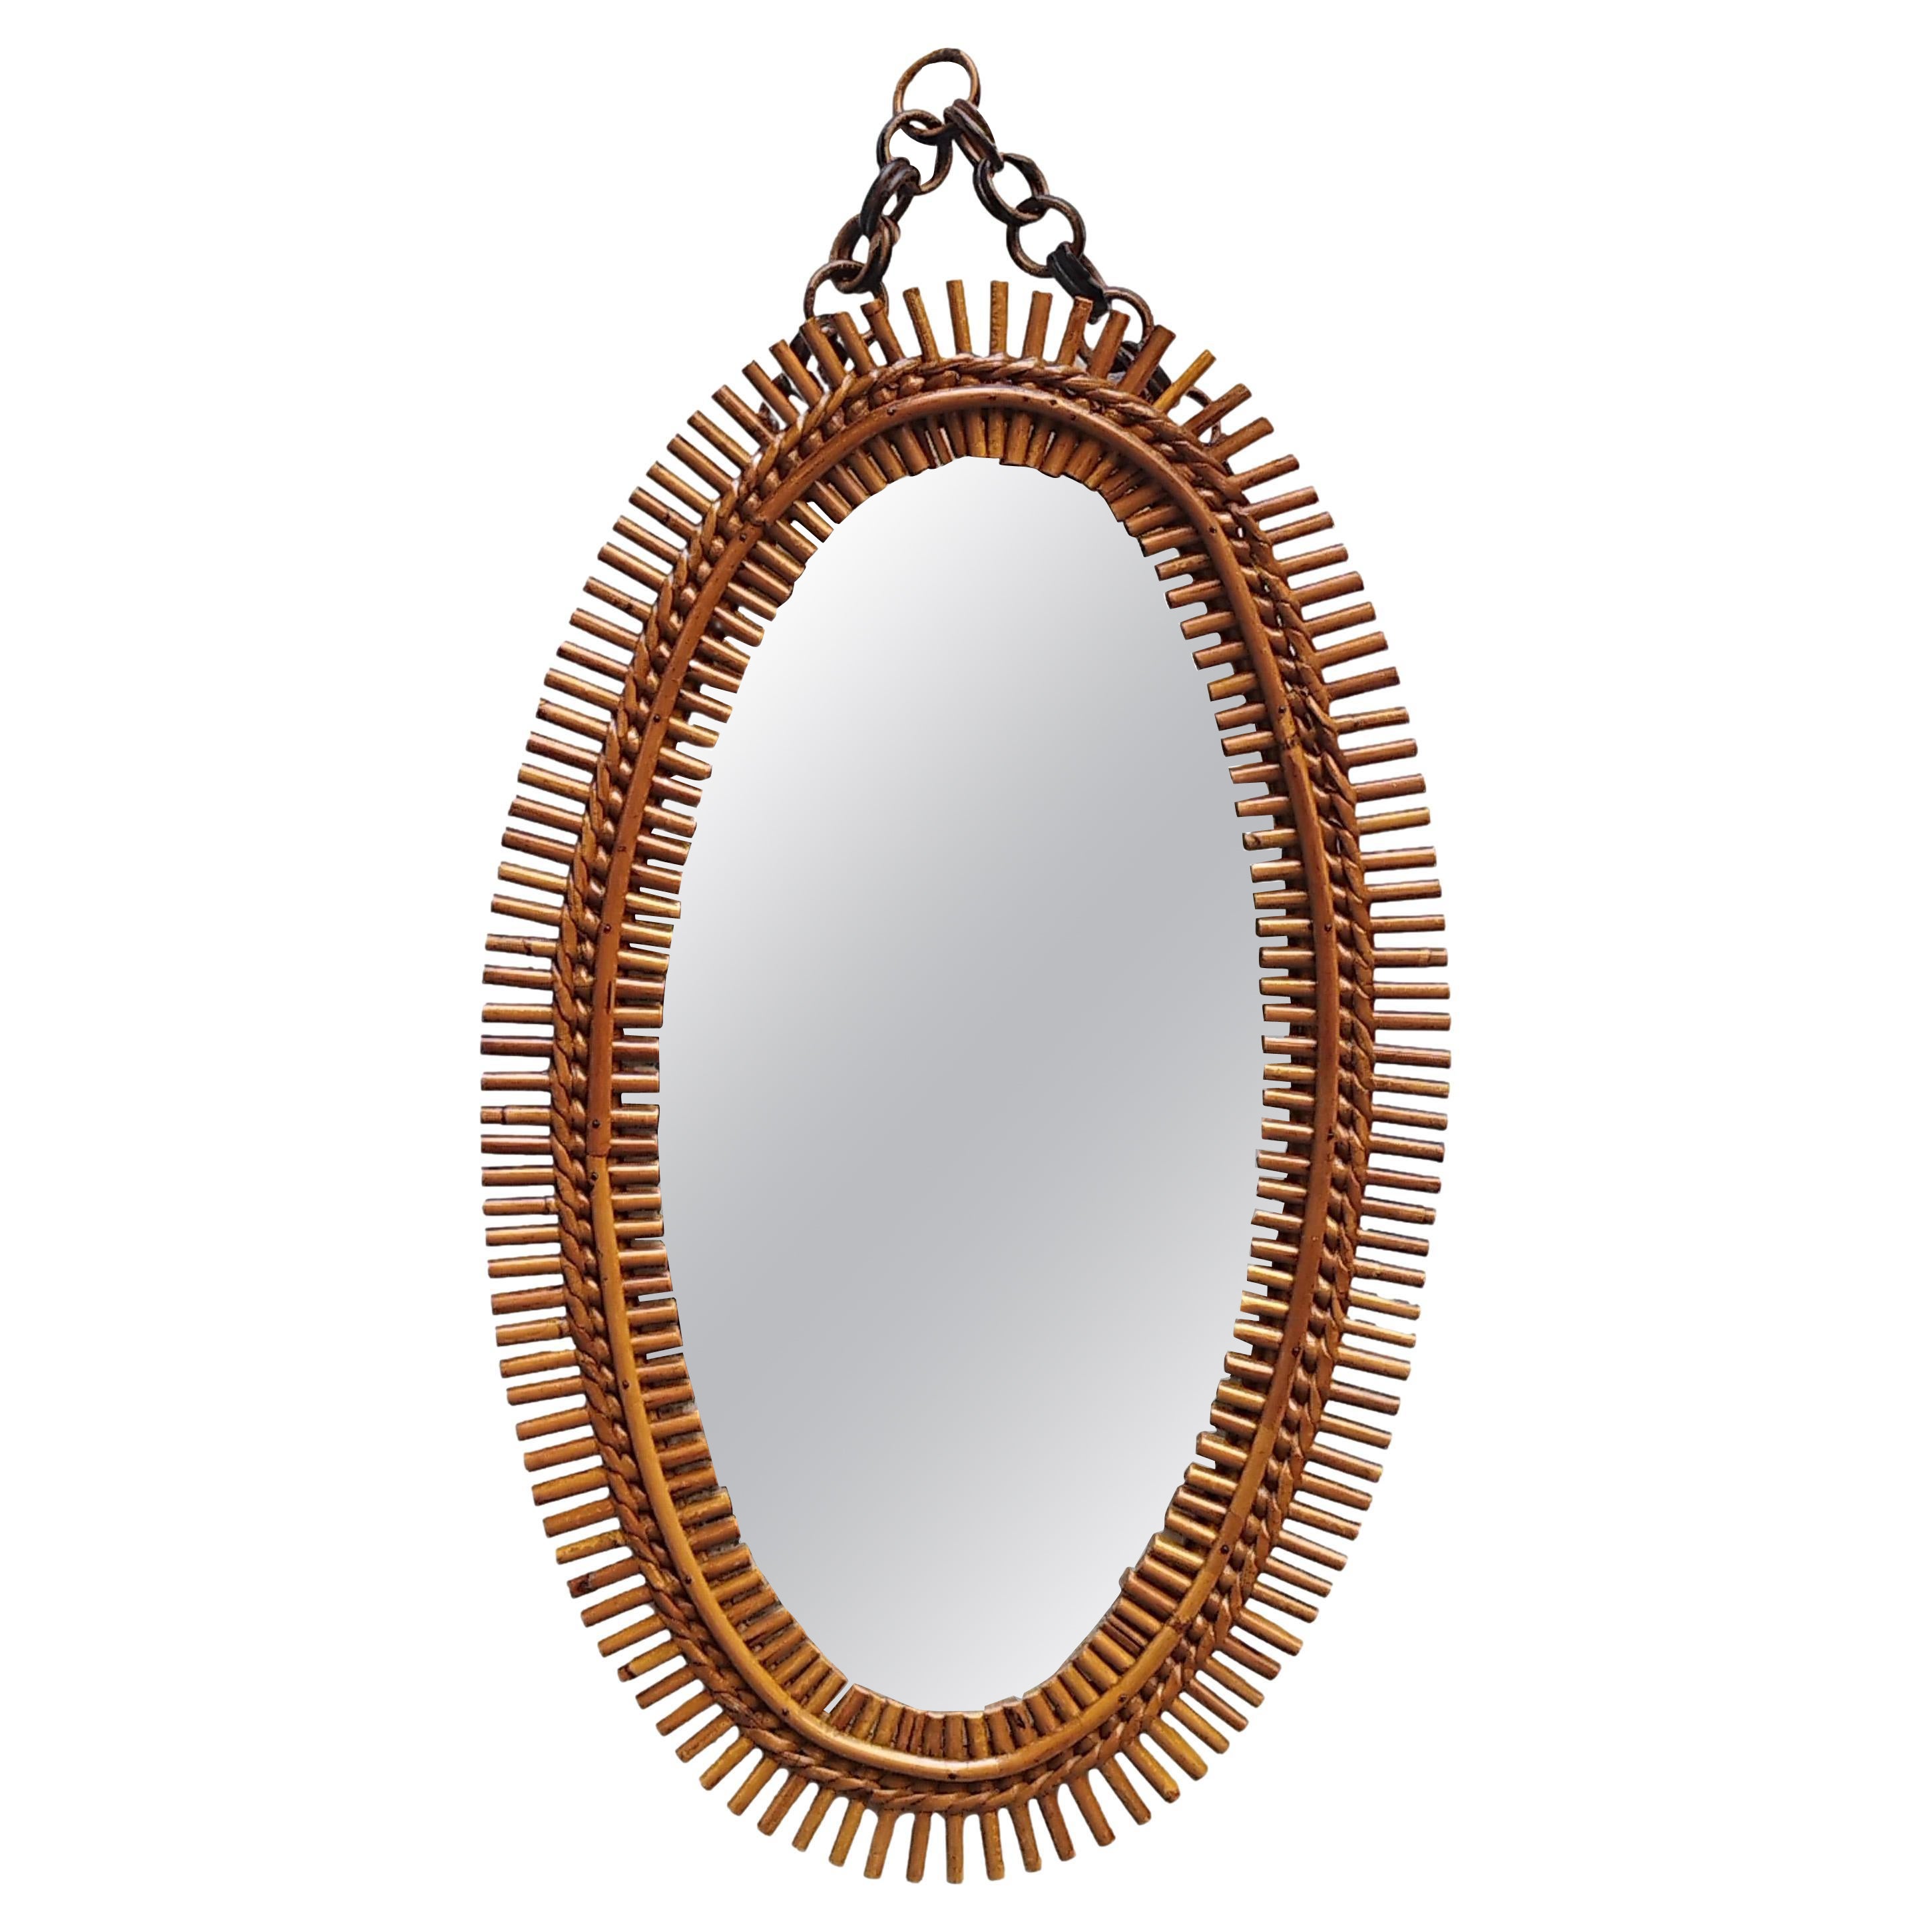 Olaf Von Bohr Rattan Oval Wall Mirror, Italy 1960s For Sale